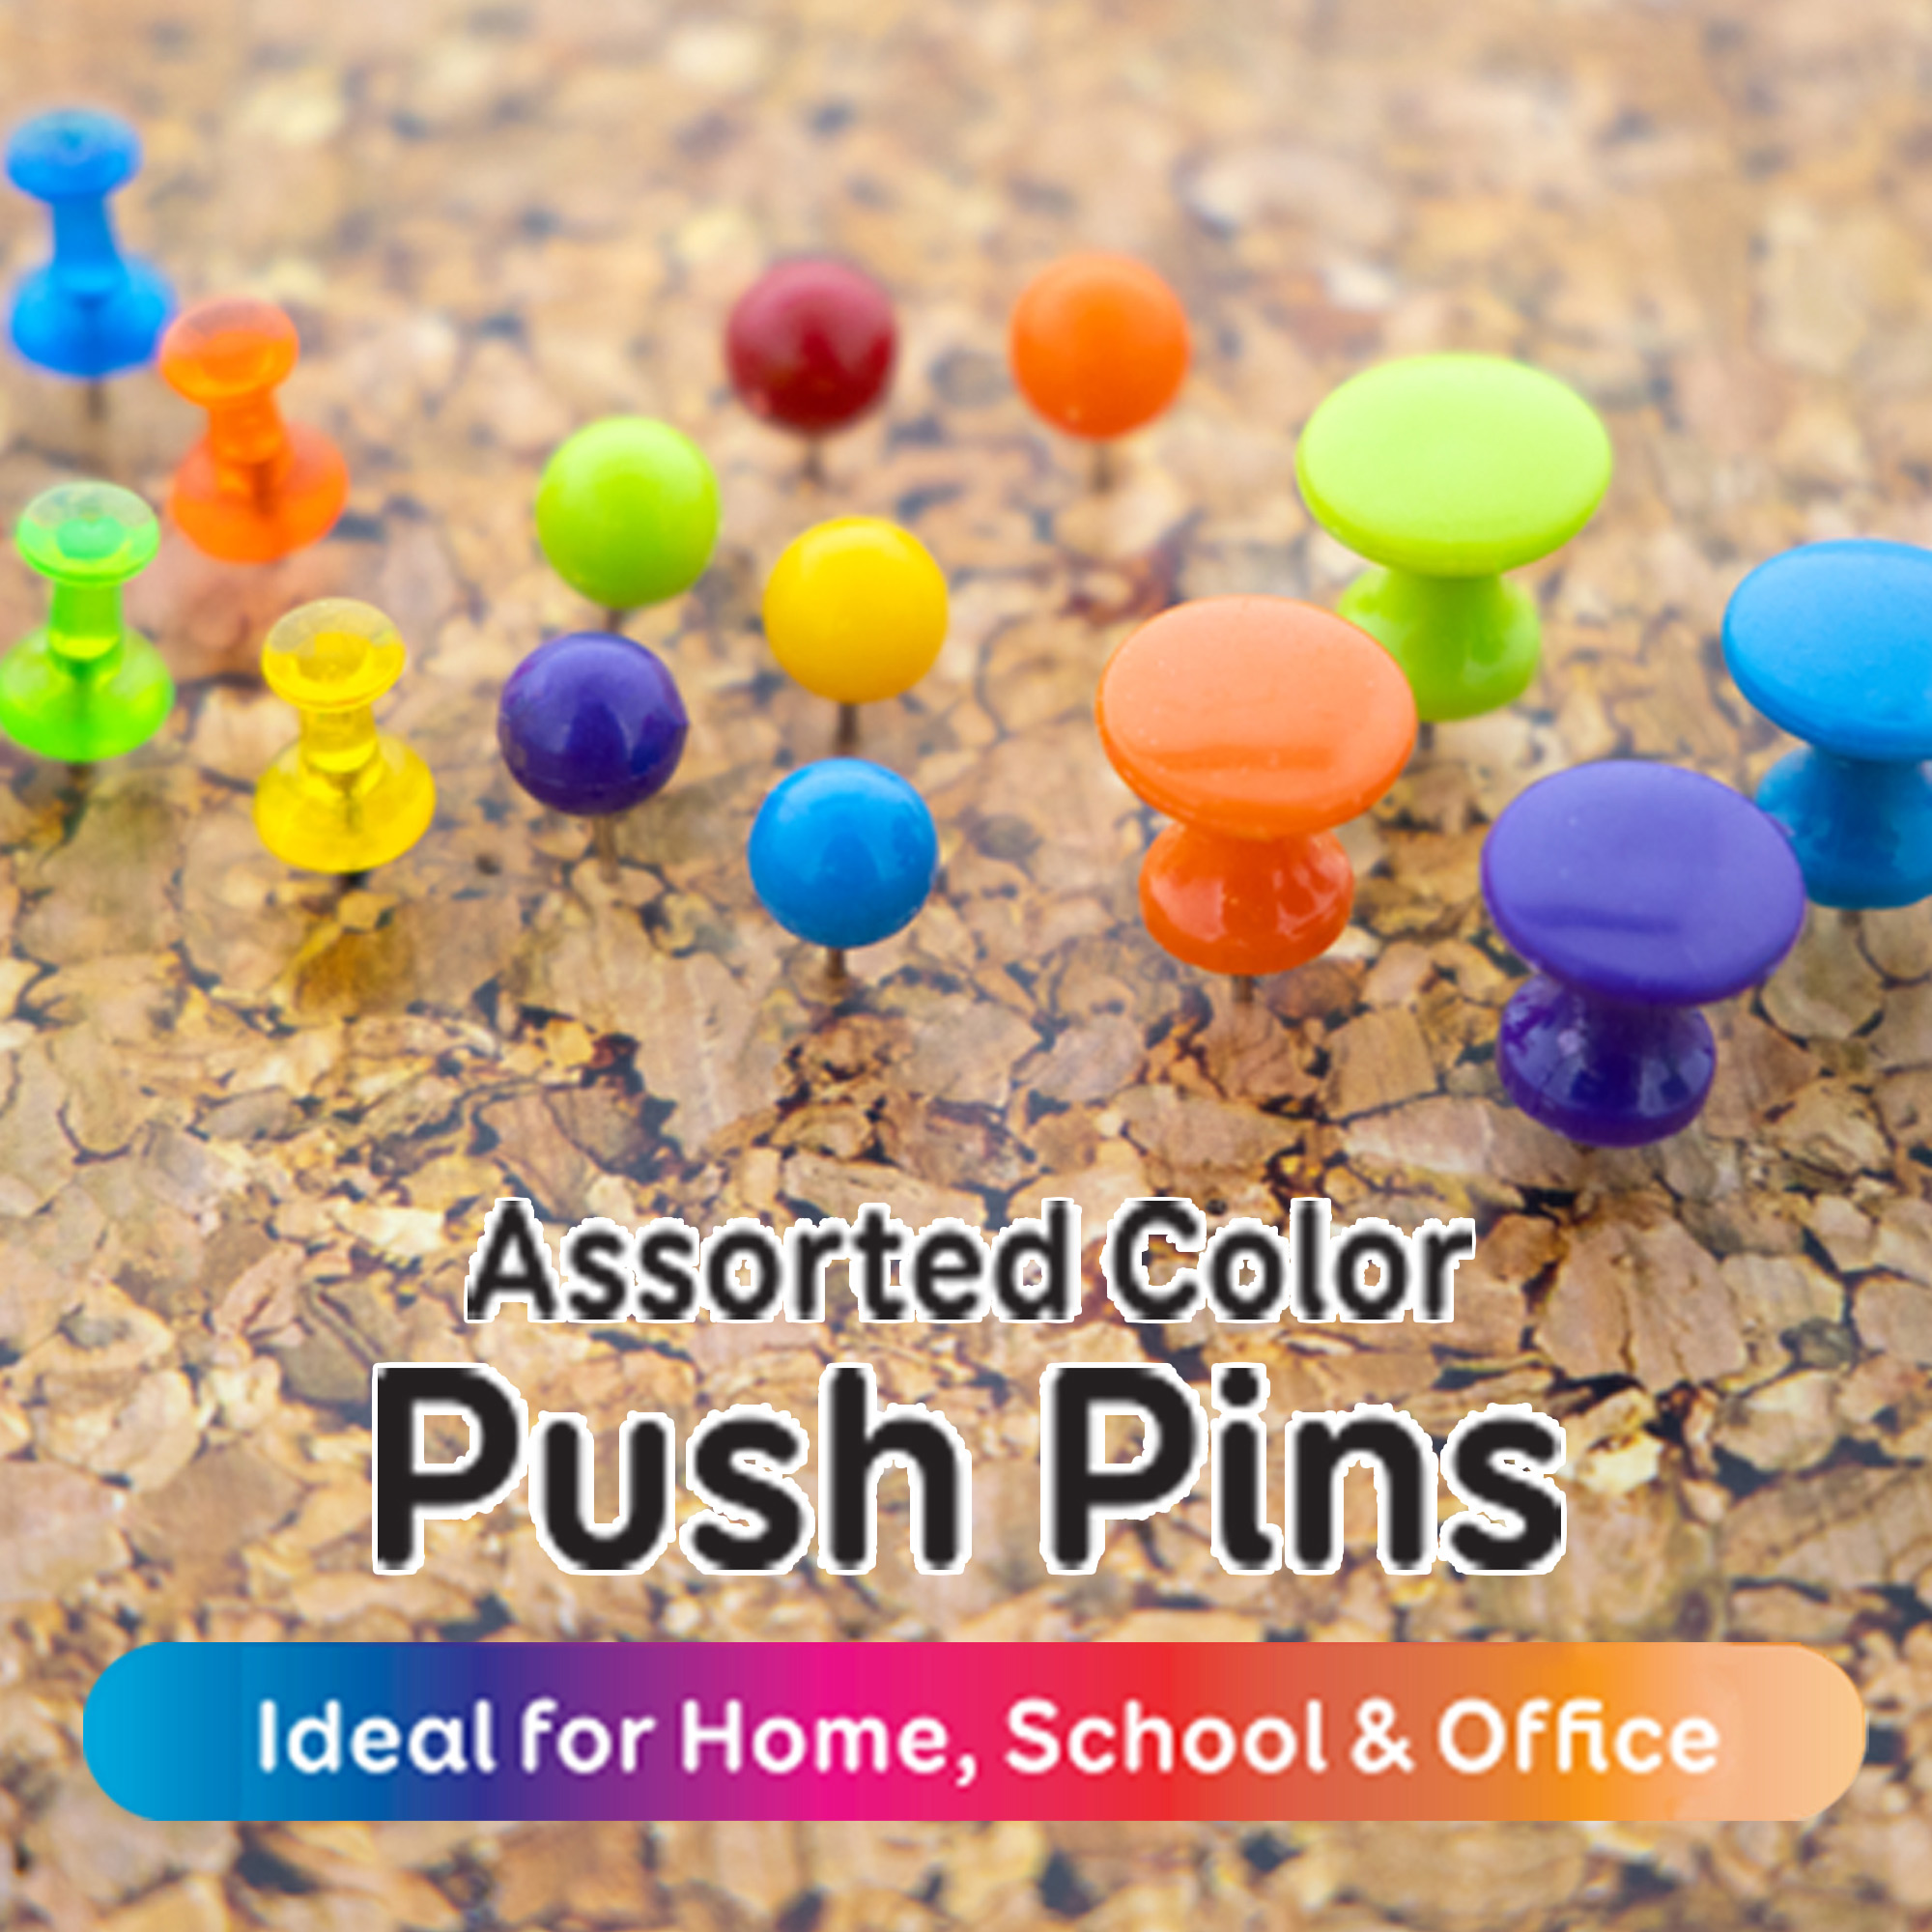 Bazic Assorted Translucent Color Push Pins 100pack Bazic Products